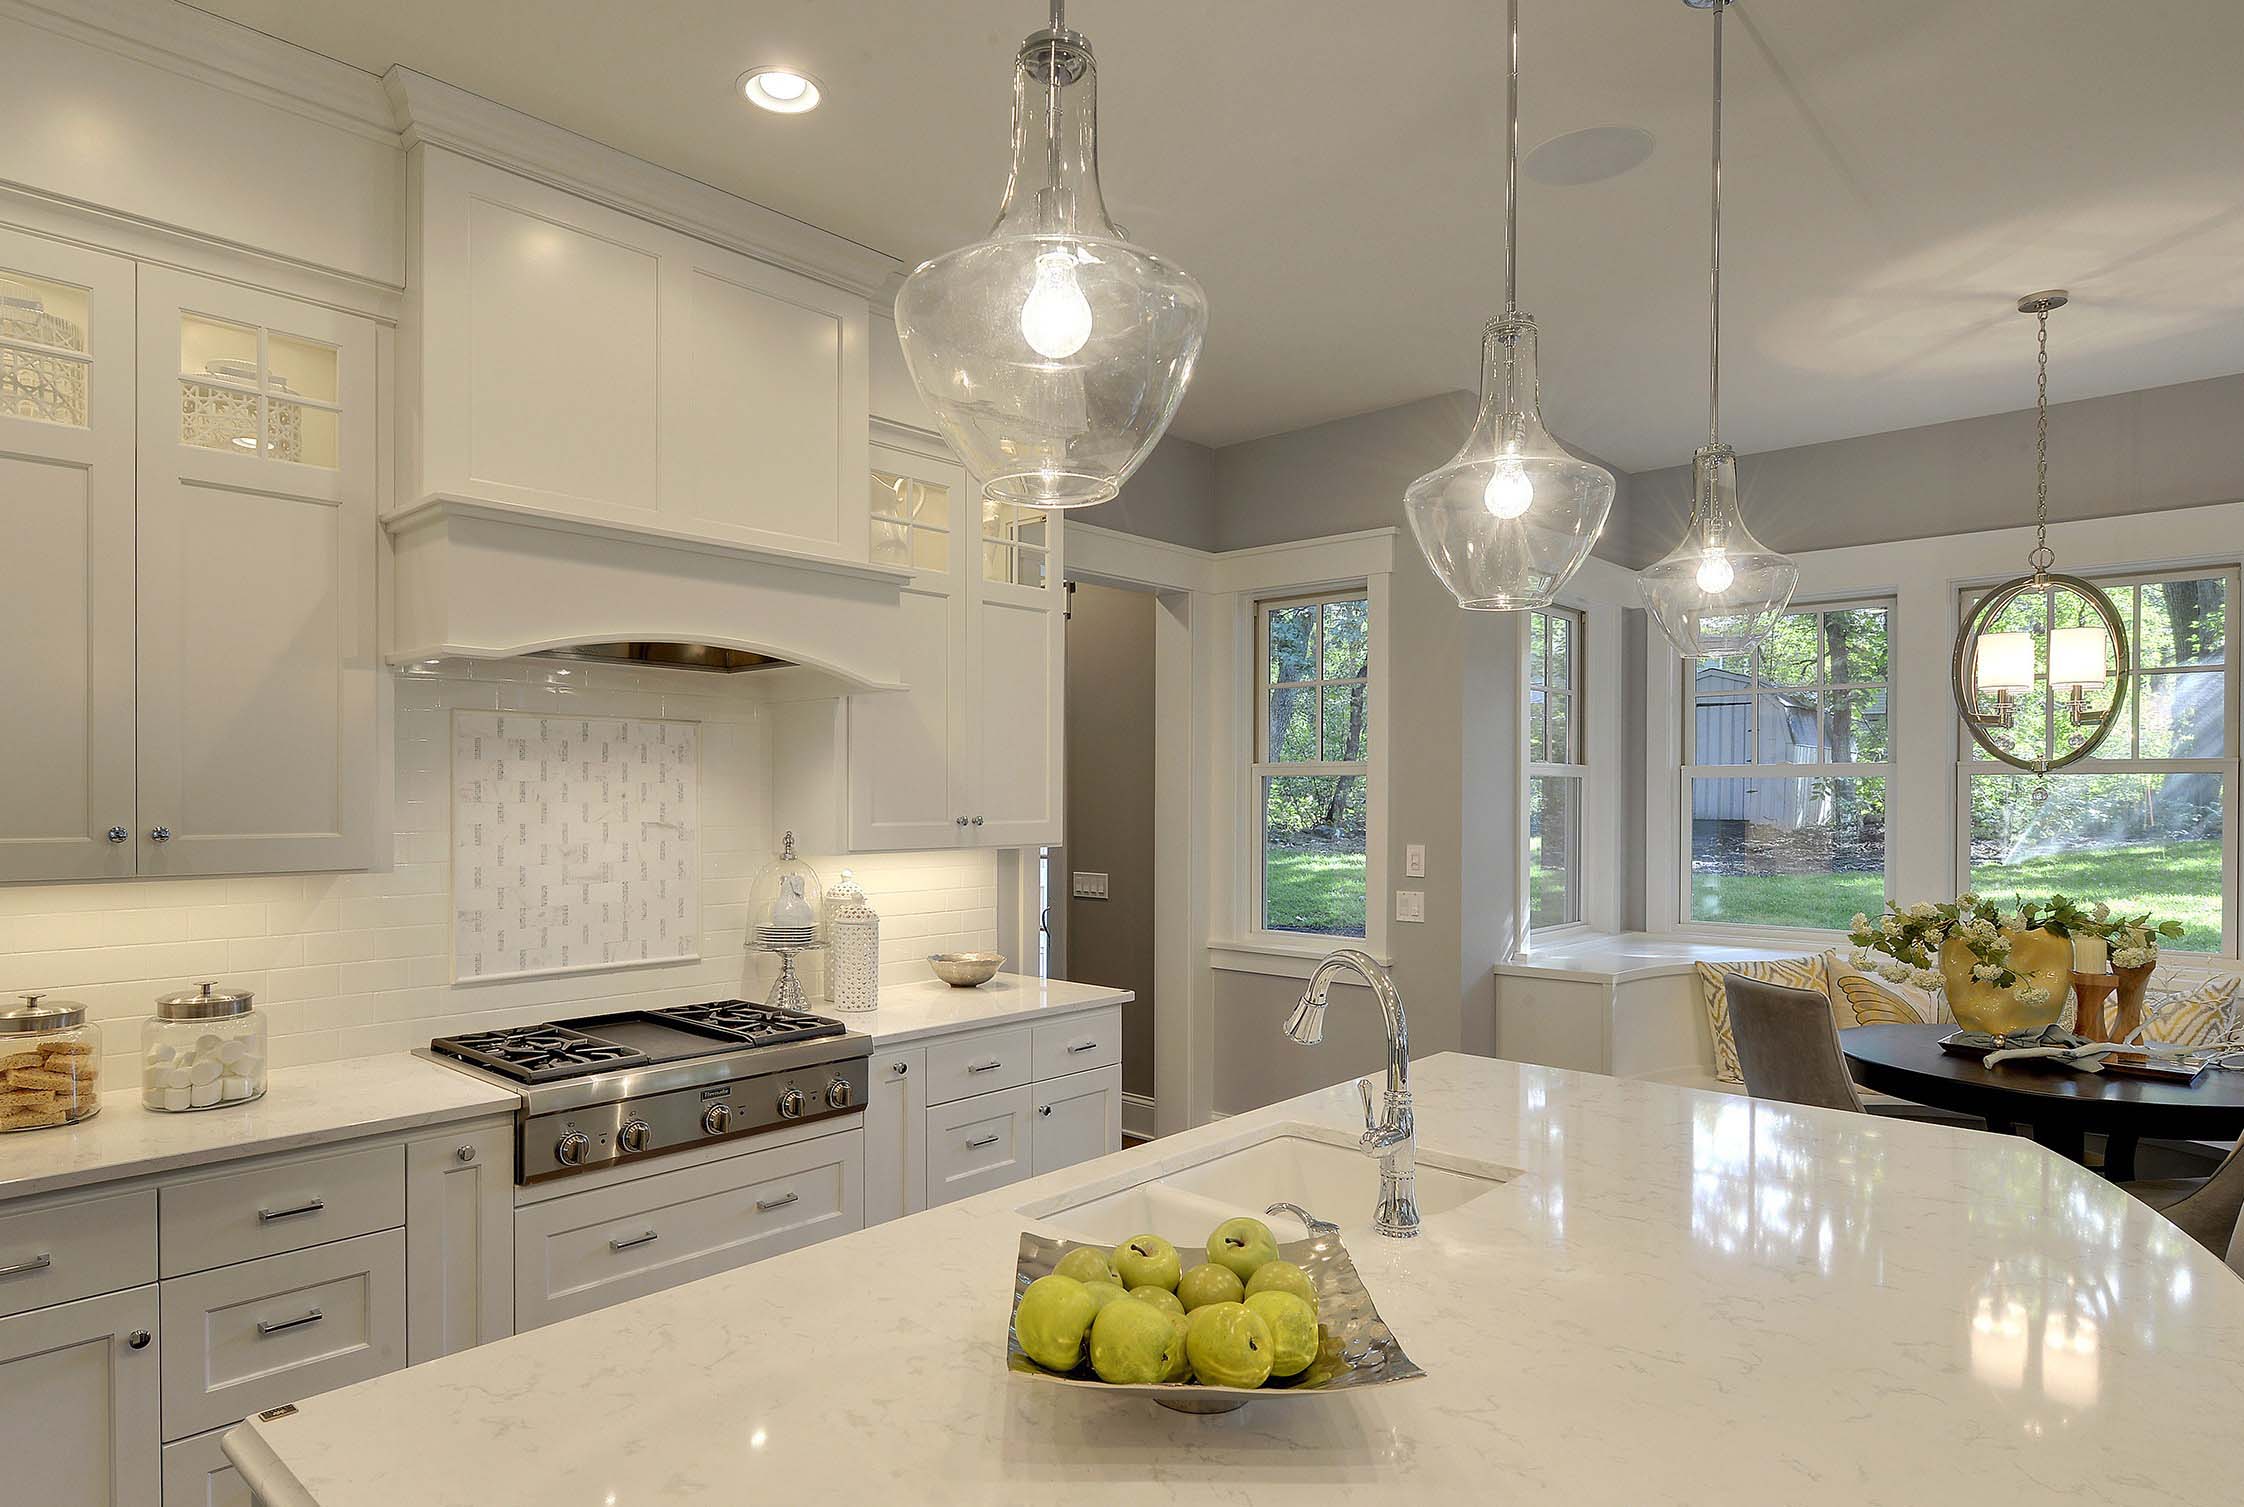 A spacious kitchen with white counter tops and a large center island.